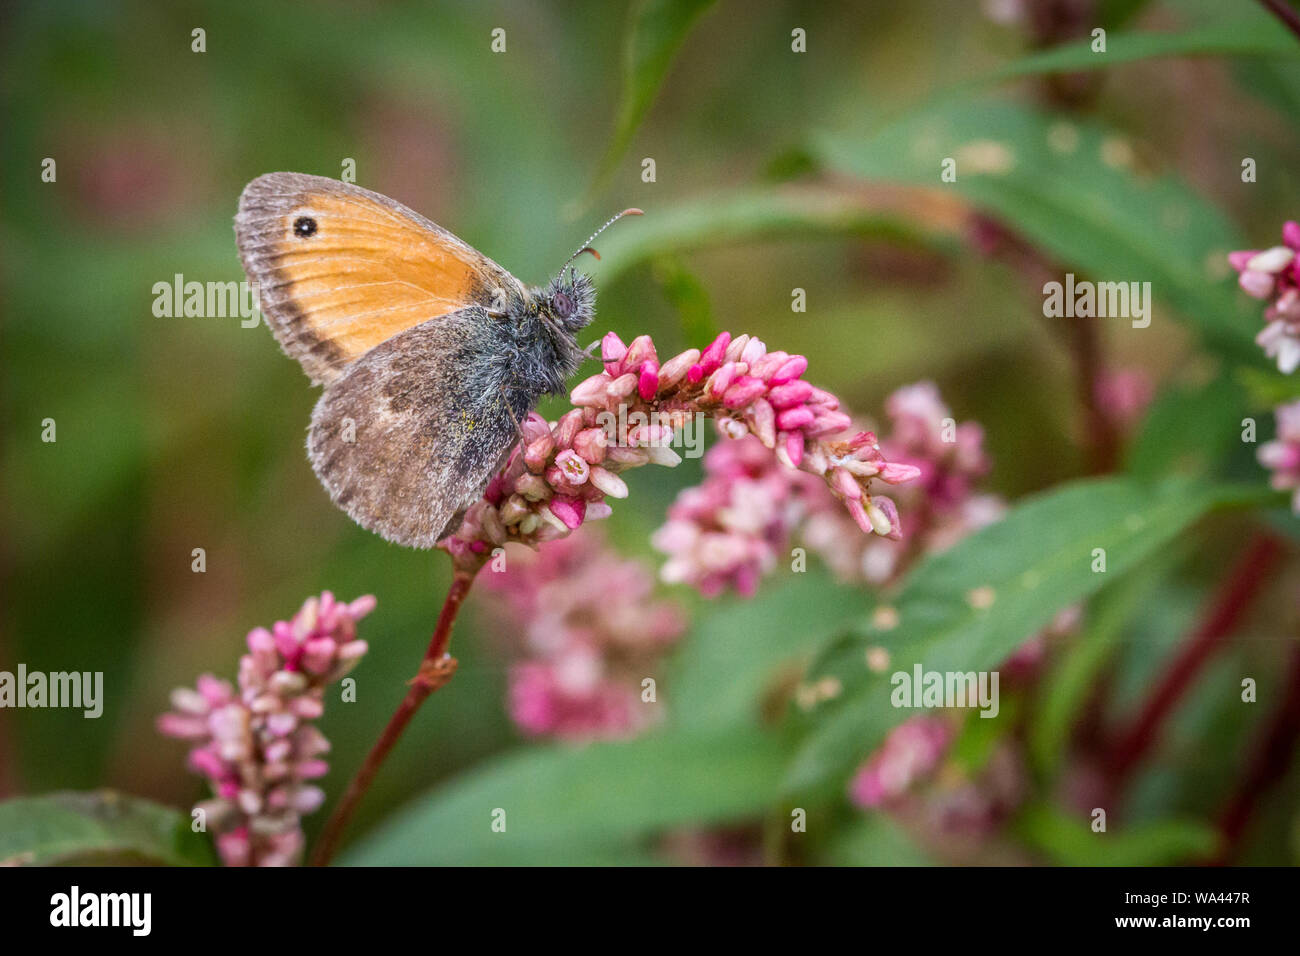 Small heath butterfly (Lepidoptera Coenonympha pamphilus) feeding on a pink flower Stock Photo